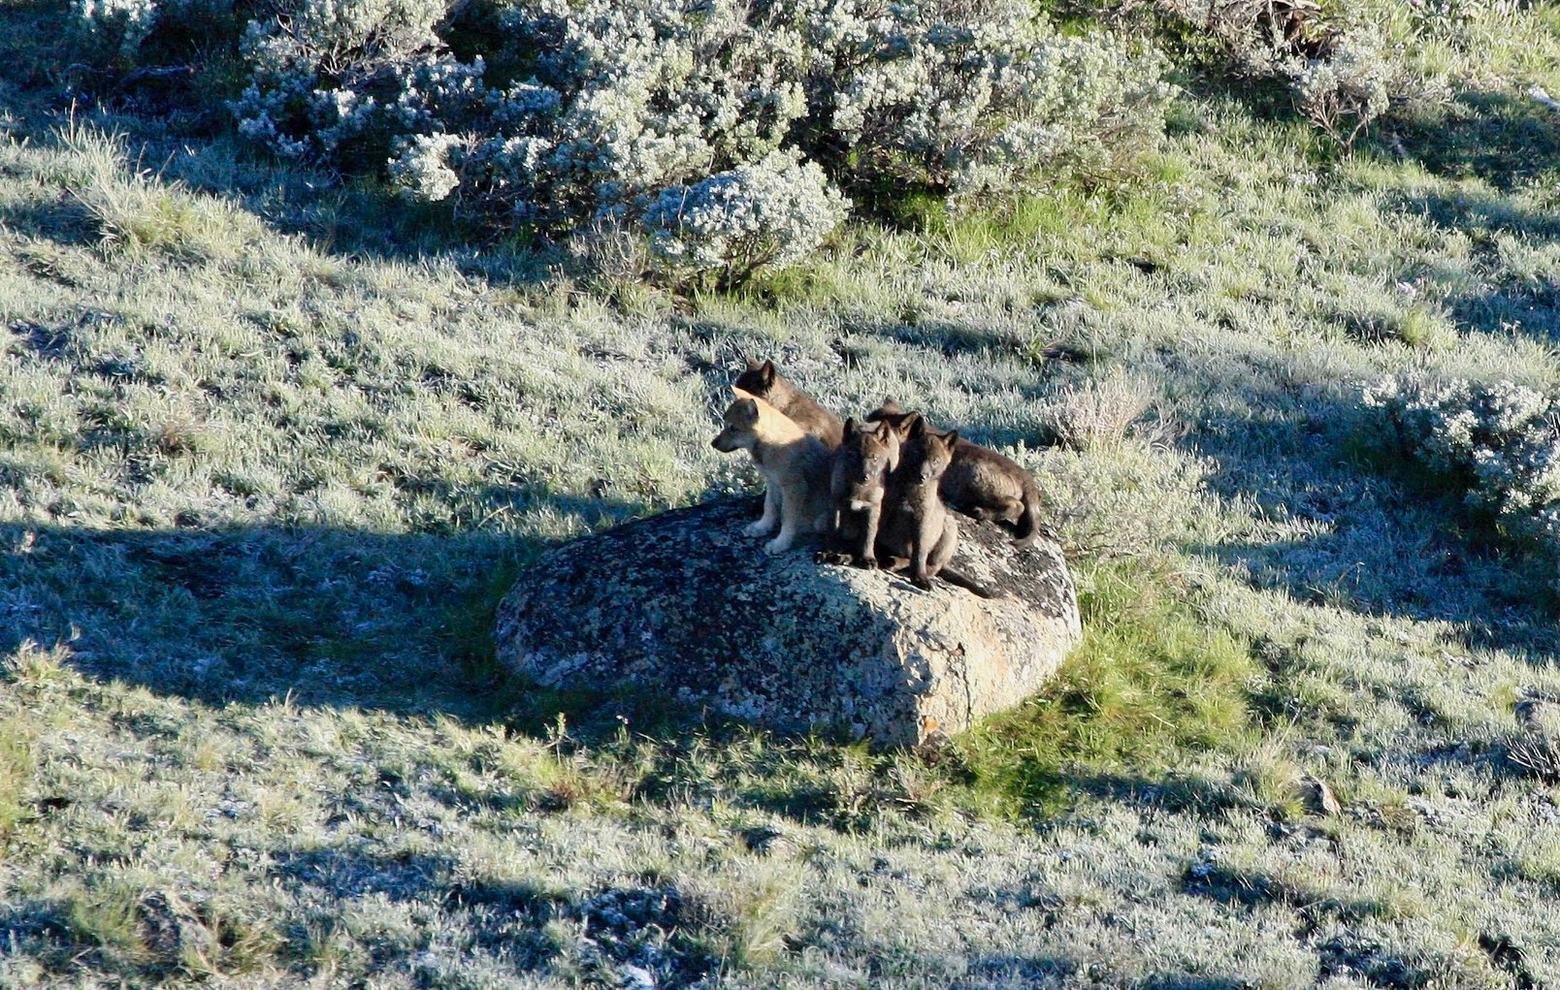 Adequate population size and genetic diversity are critical for the long-term survival of the Western gray wolf. Larger pack sizes also make hunting easier, further ensuring pack success. Photo by Dan Stahler/NPS